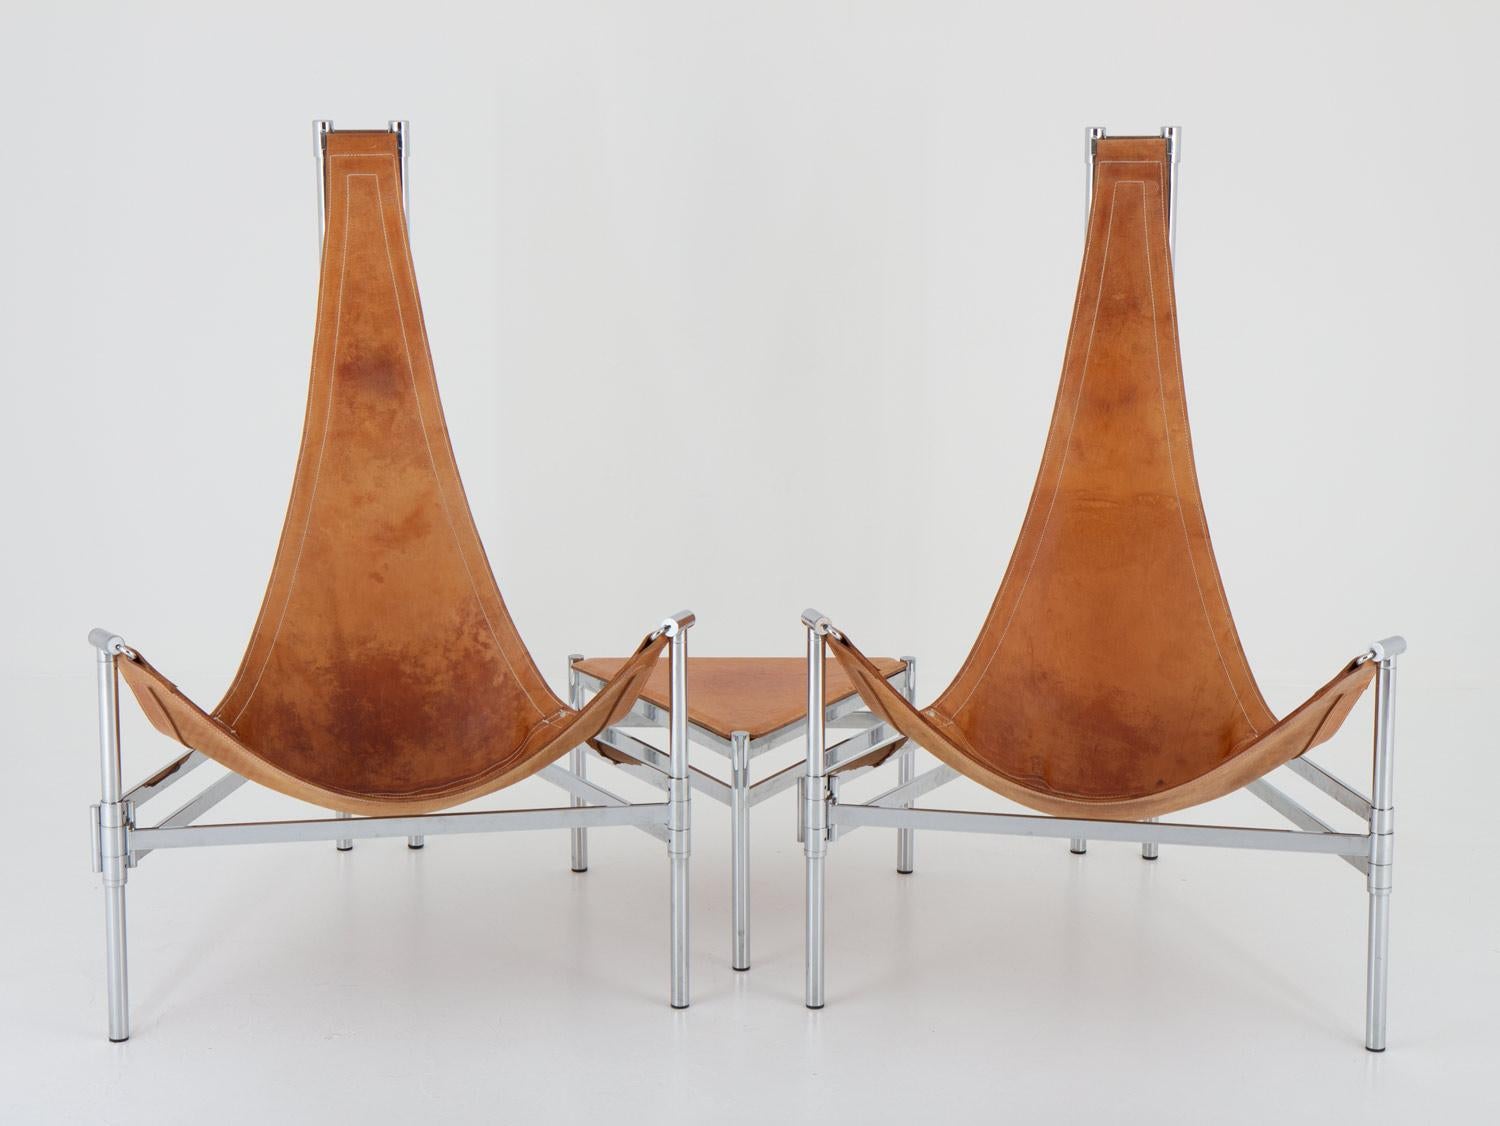 Rare armchairs and side table in chrome and leather by Christina and Lars Andersson, 1980s. 
This chairs consist of a chromed metal frame, supporting the thick Tärnsjö saddle leather used for the seating. The cognac-coloured leather shows a perfect